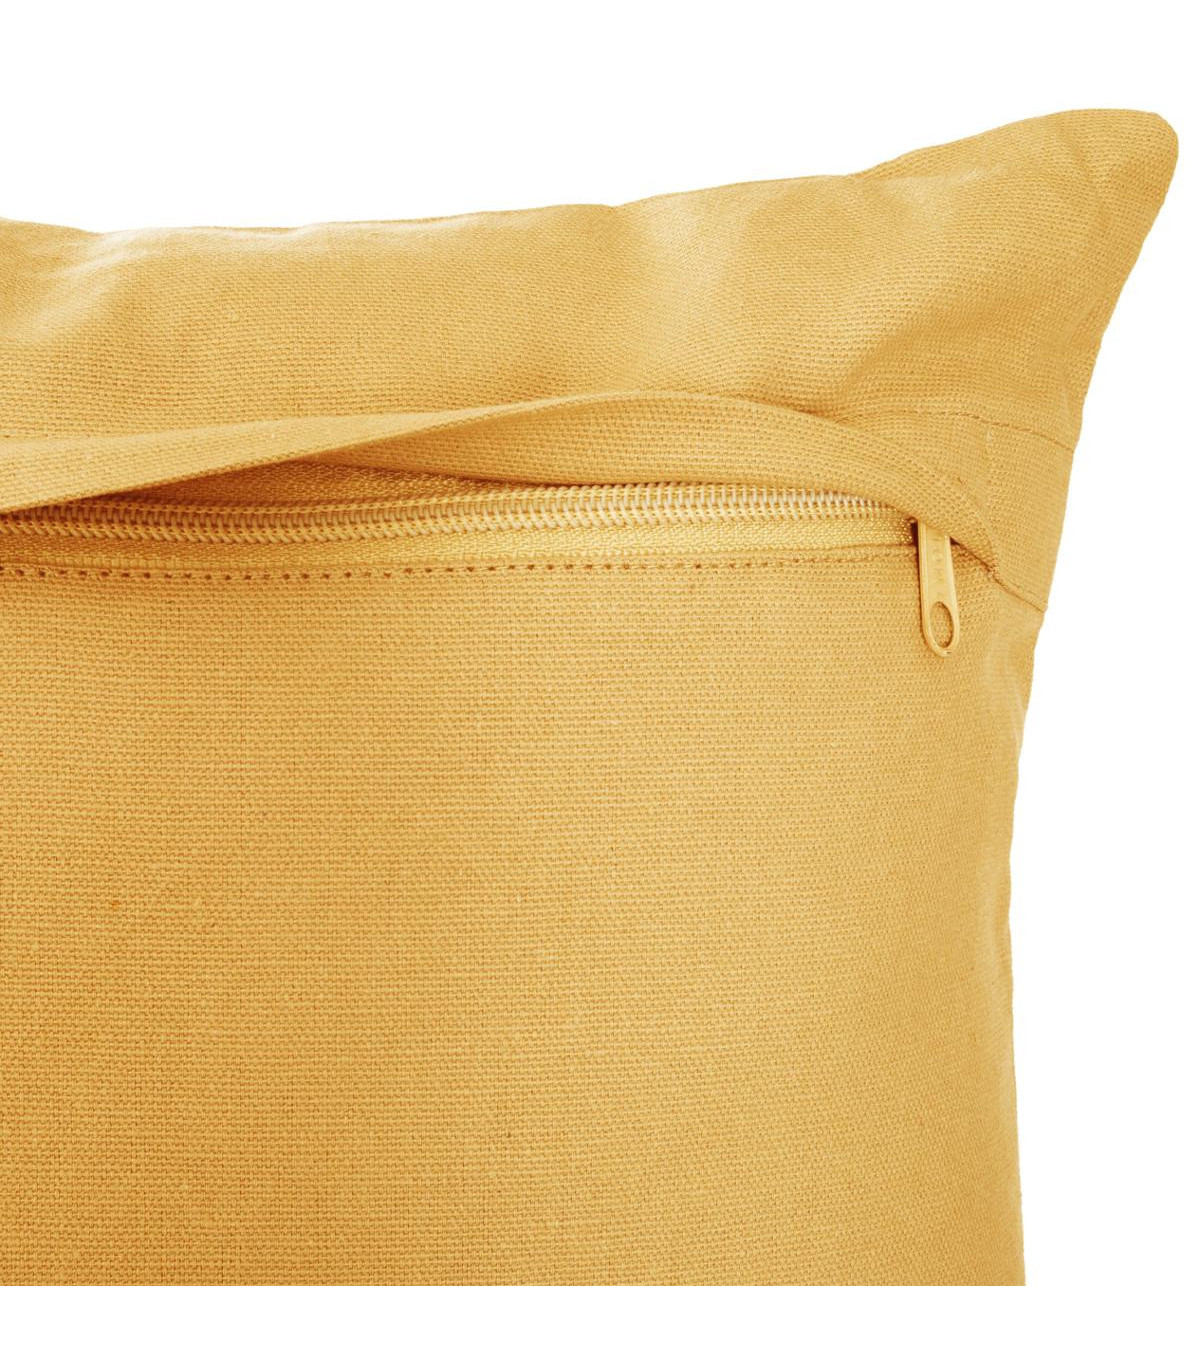 coussin-motif-otto-ocre-38x38 (4)